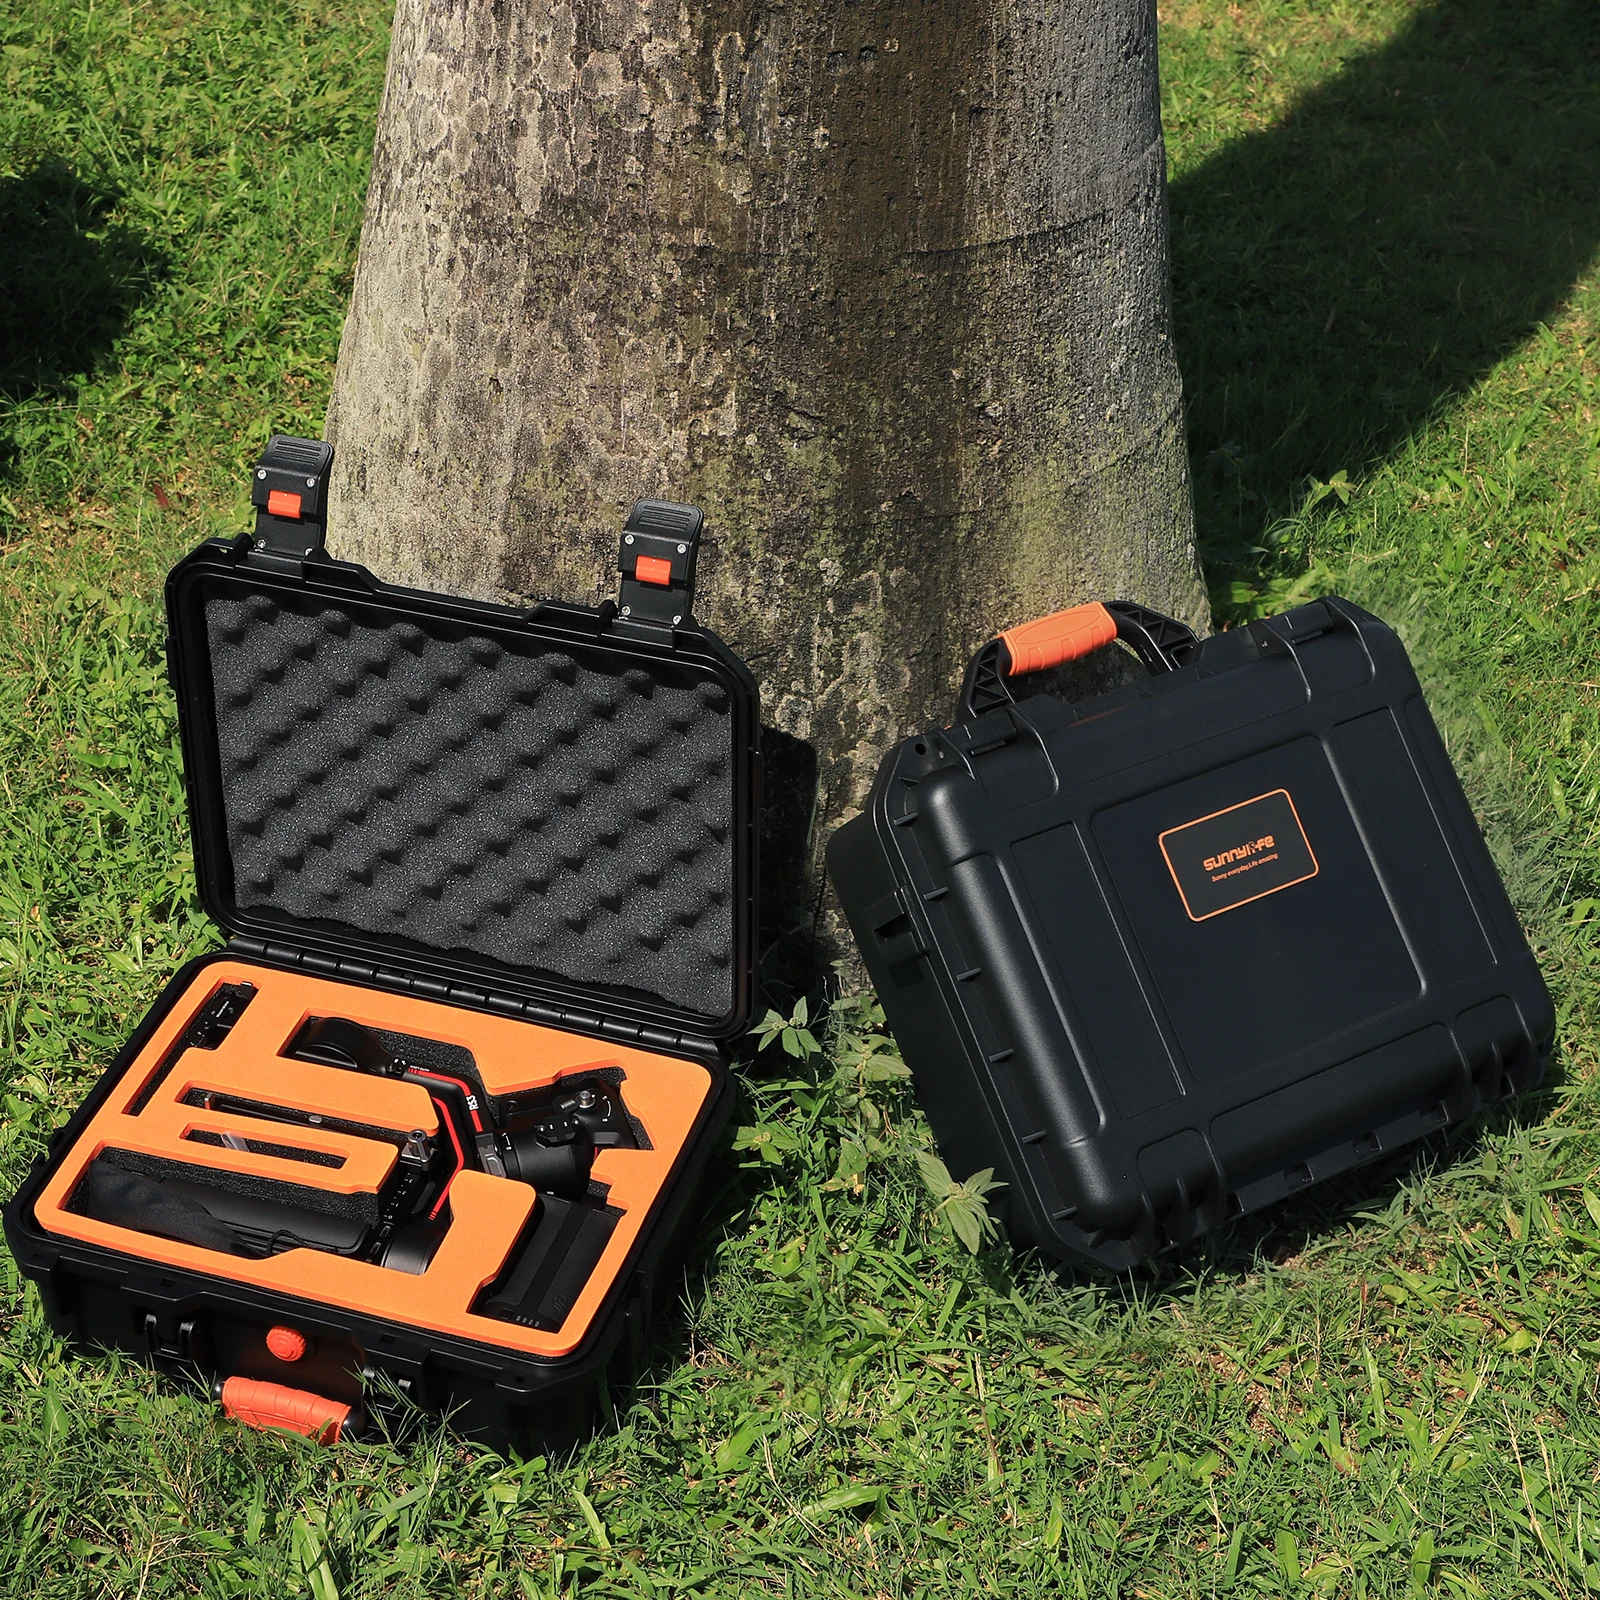 For DJI Ruying RS3 safety box waterproof storage bag handheld gimbal stabilizer outdoor protective suitcase enlarge